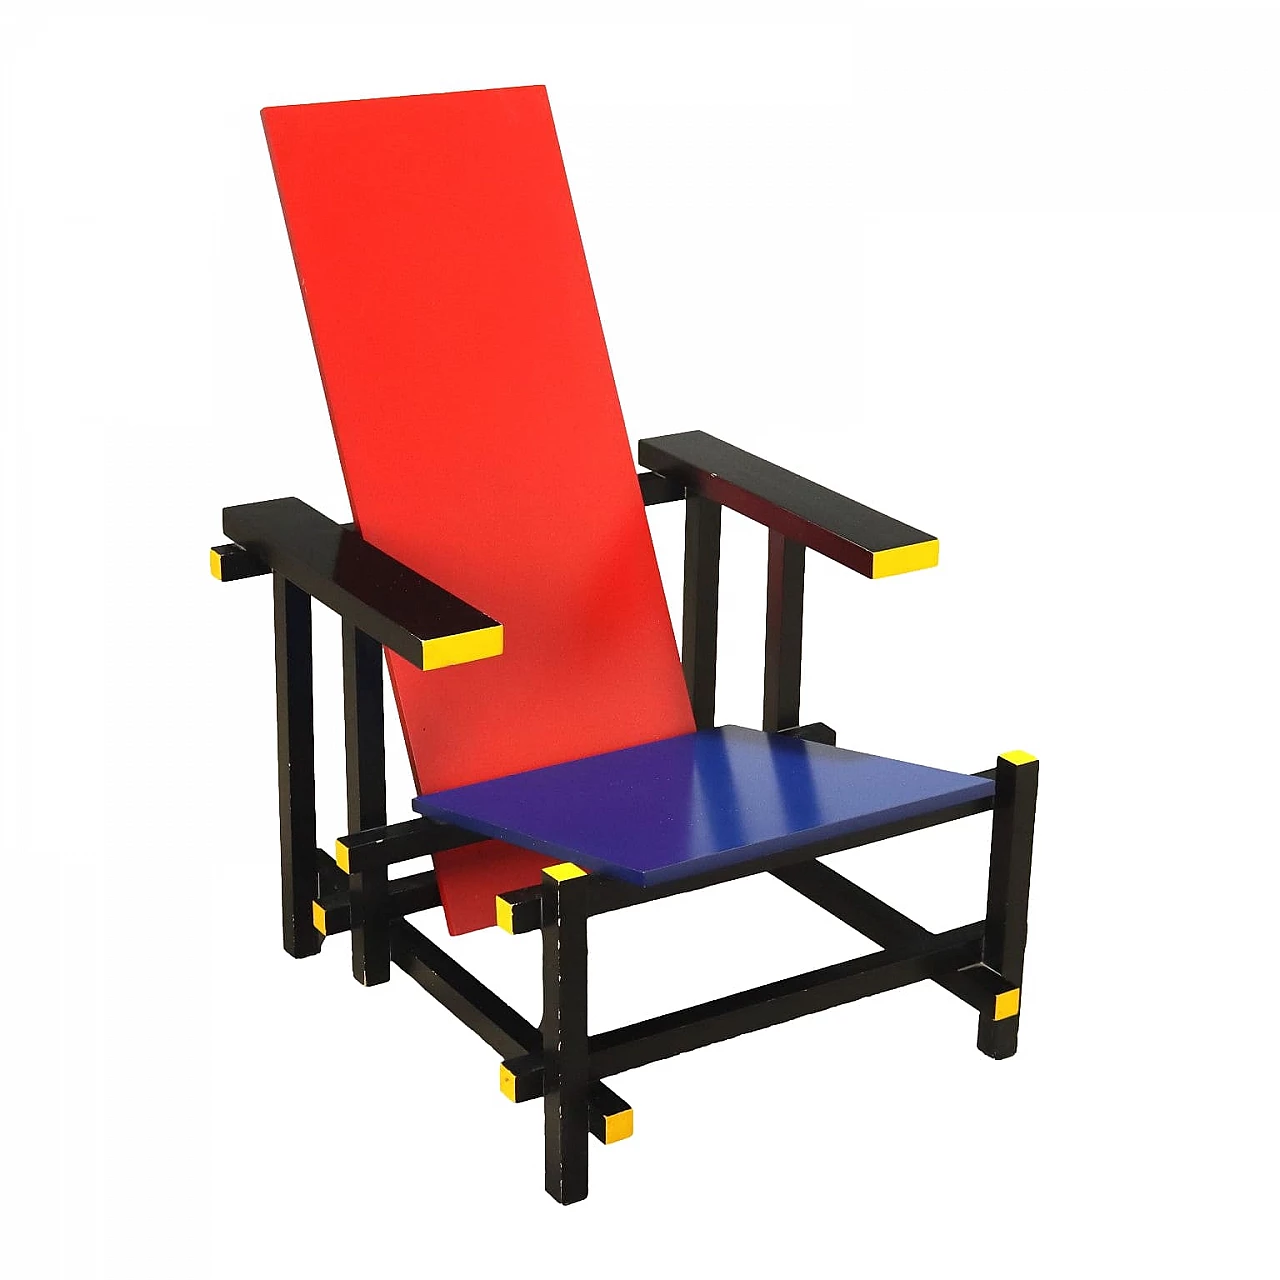 Wood armchair in the style of the Red and Blue by Gerrit Rietveld, 1980s 1